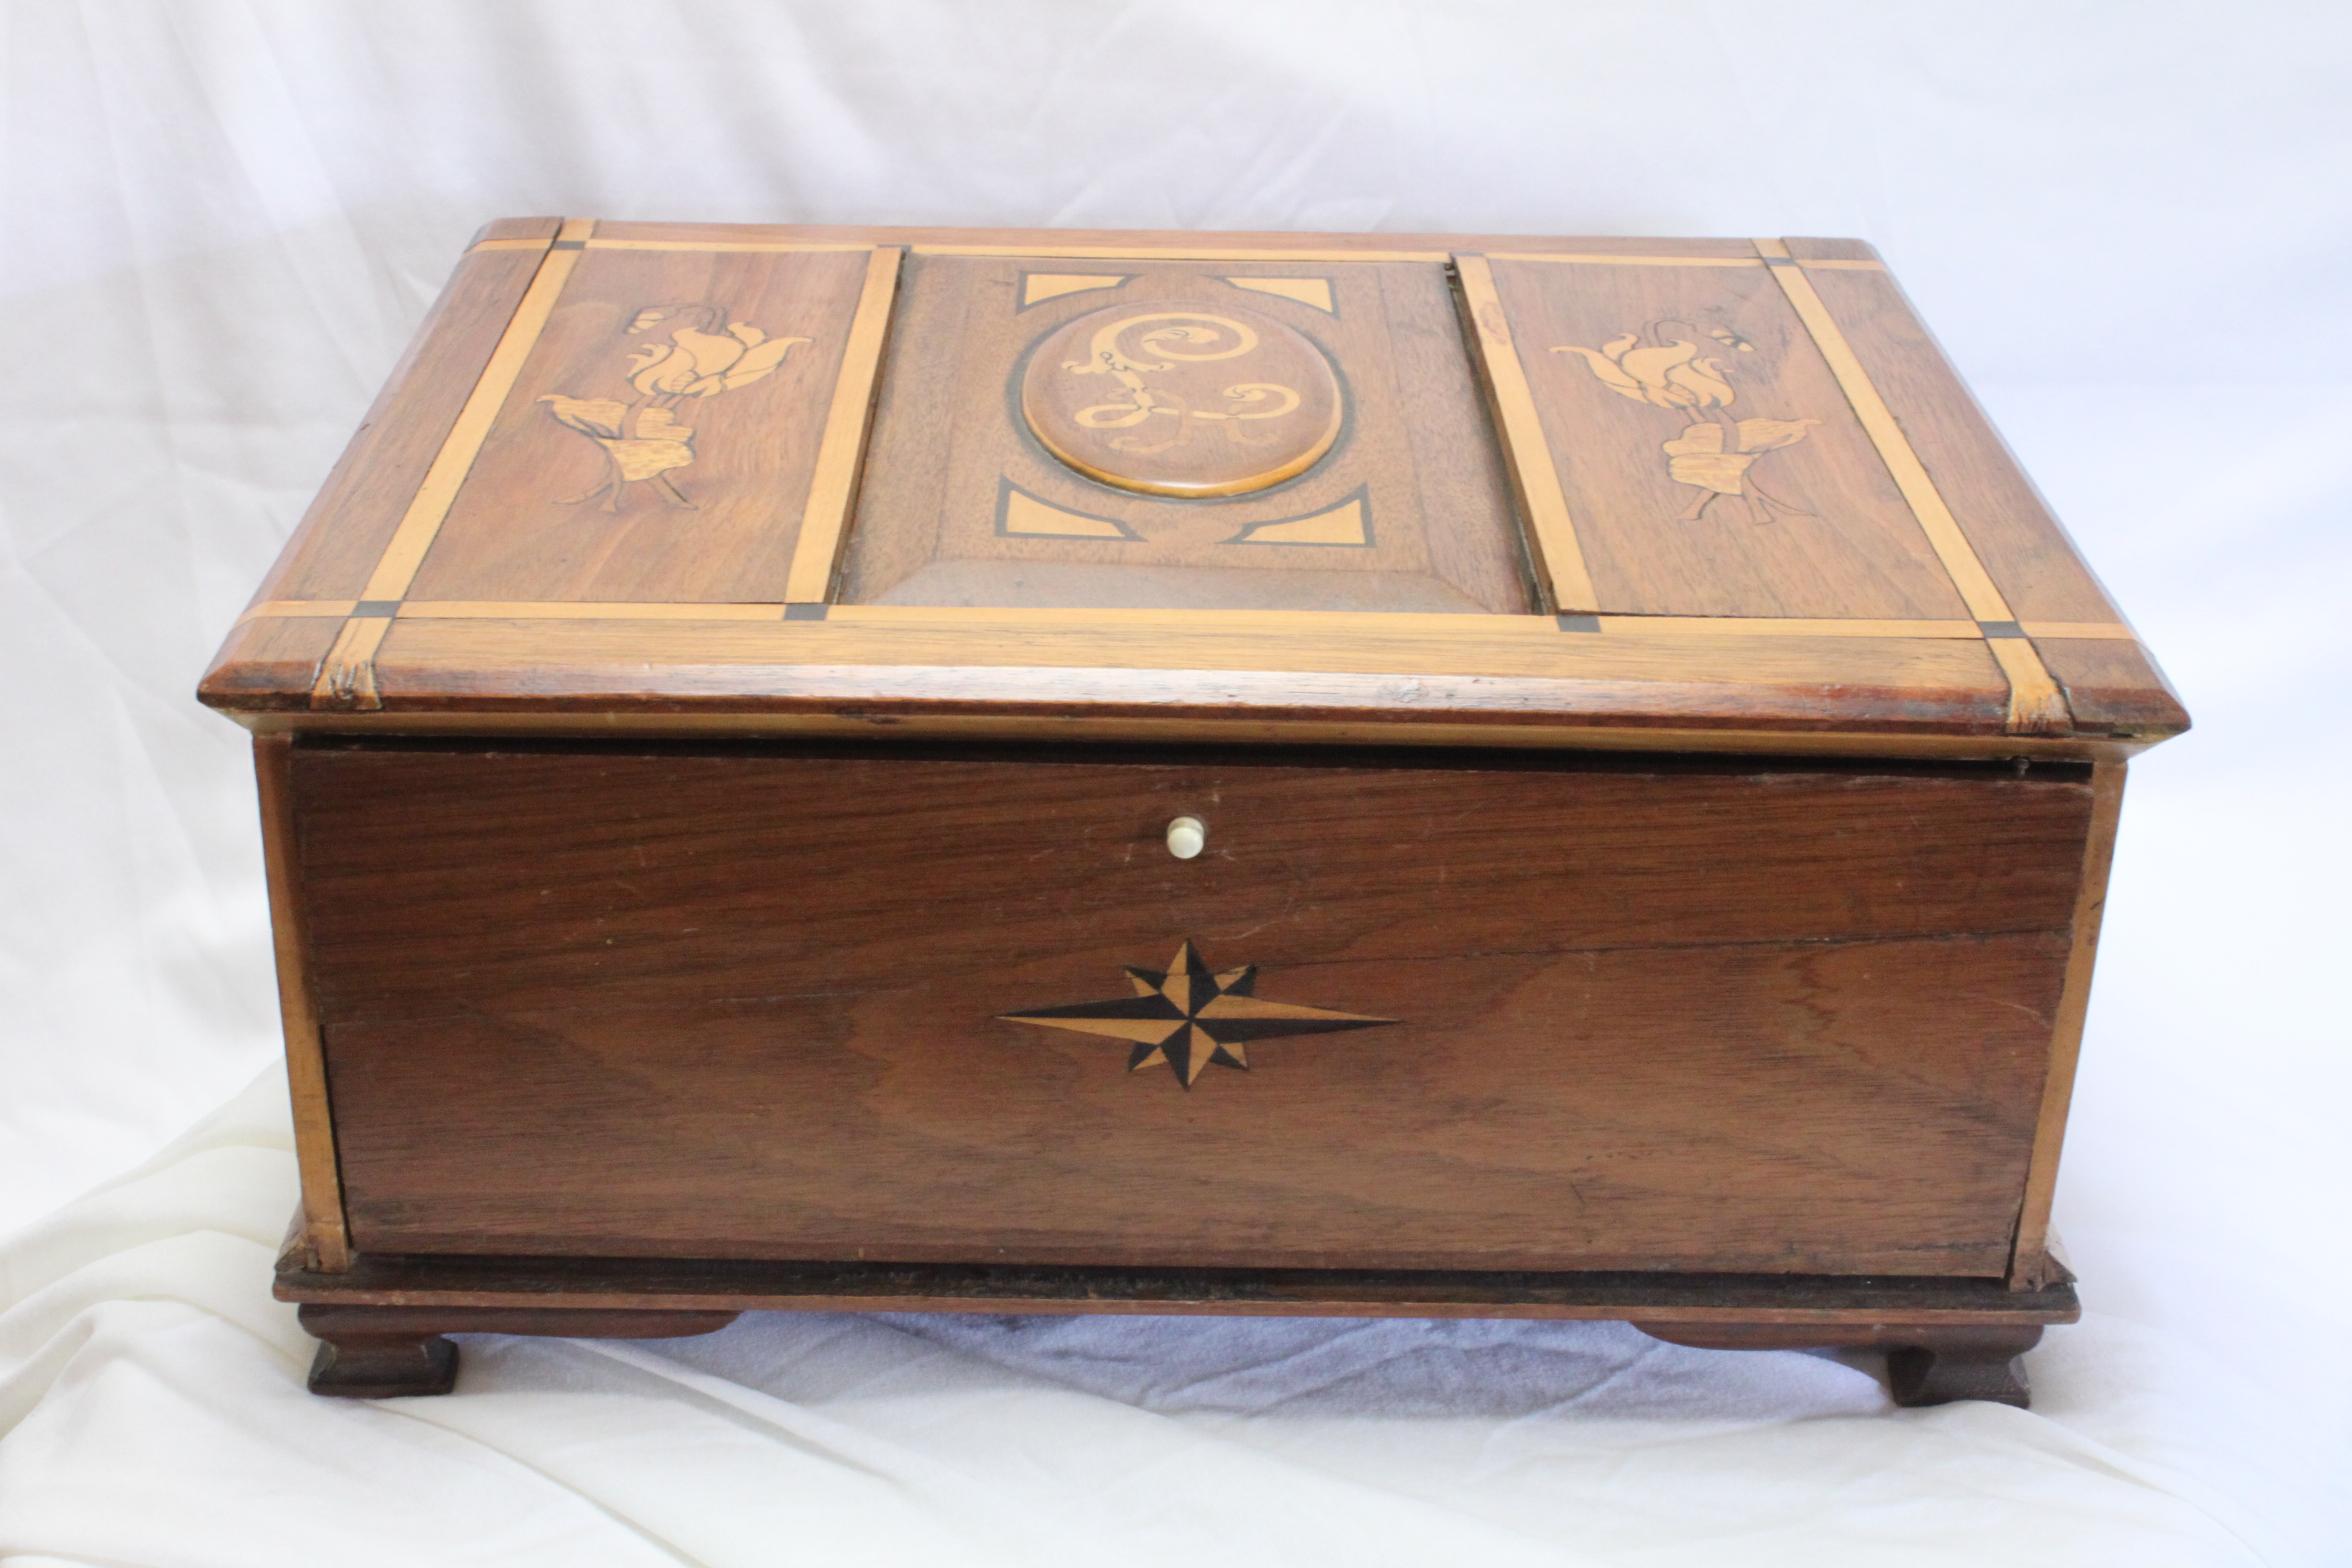 This walnut dressing table box features inlays to each surface, most in the Art Nouveau style. On the lid, flanking the central cartouche, are two representations of tulips and in the centre are the letters 